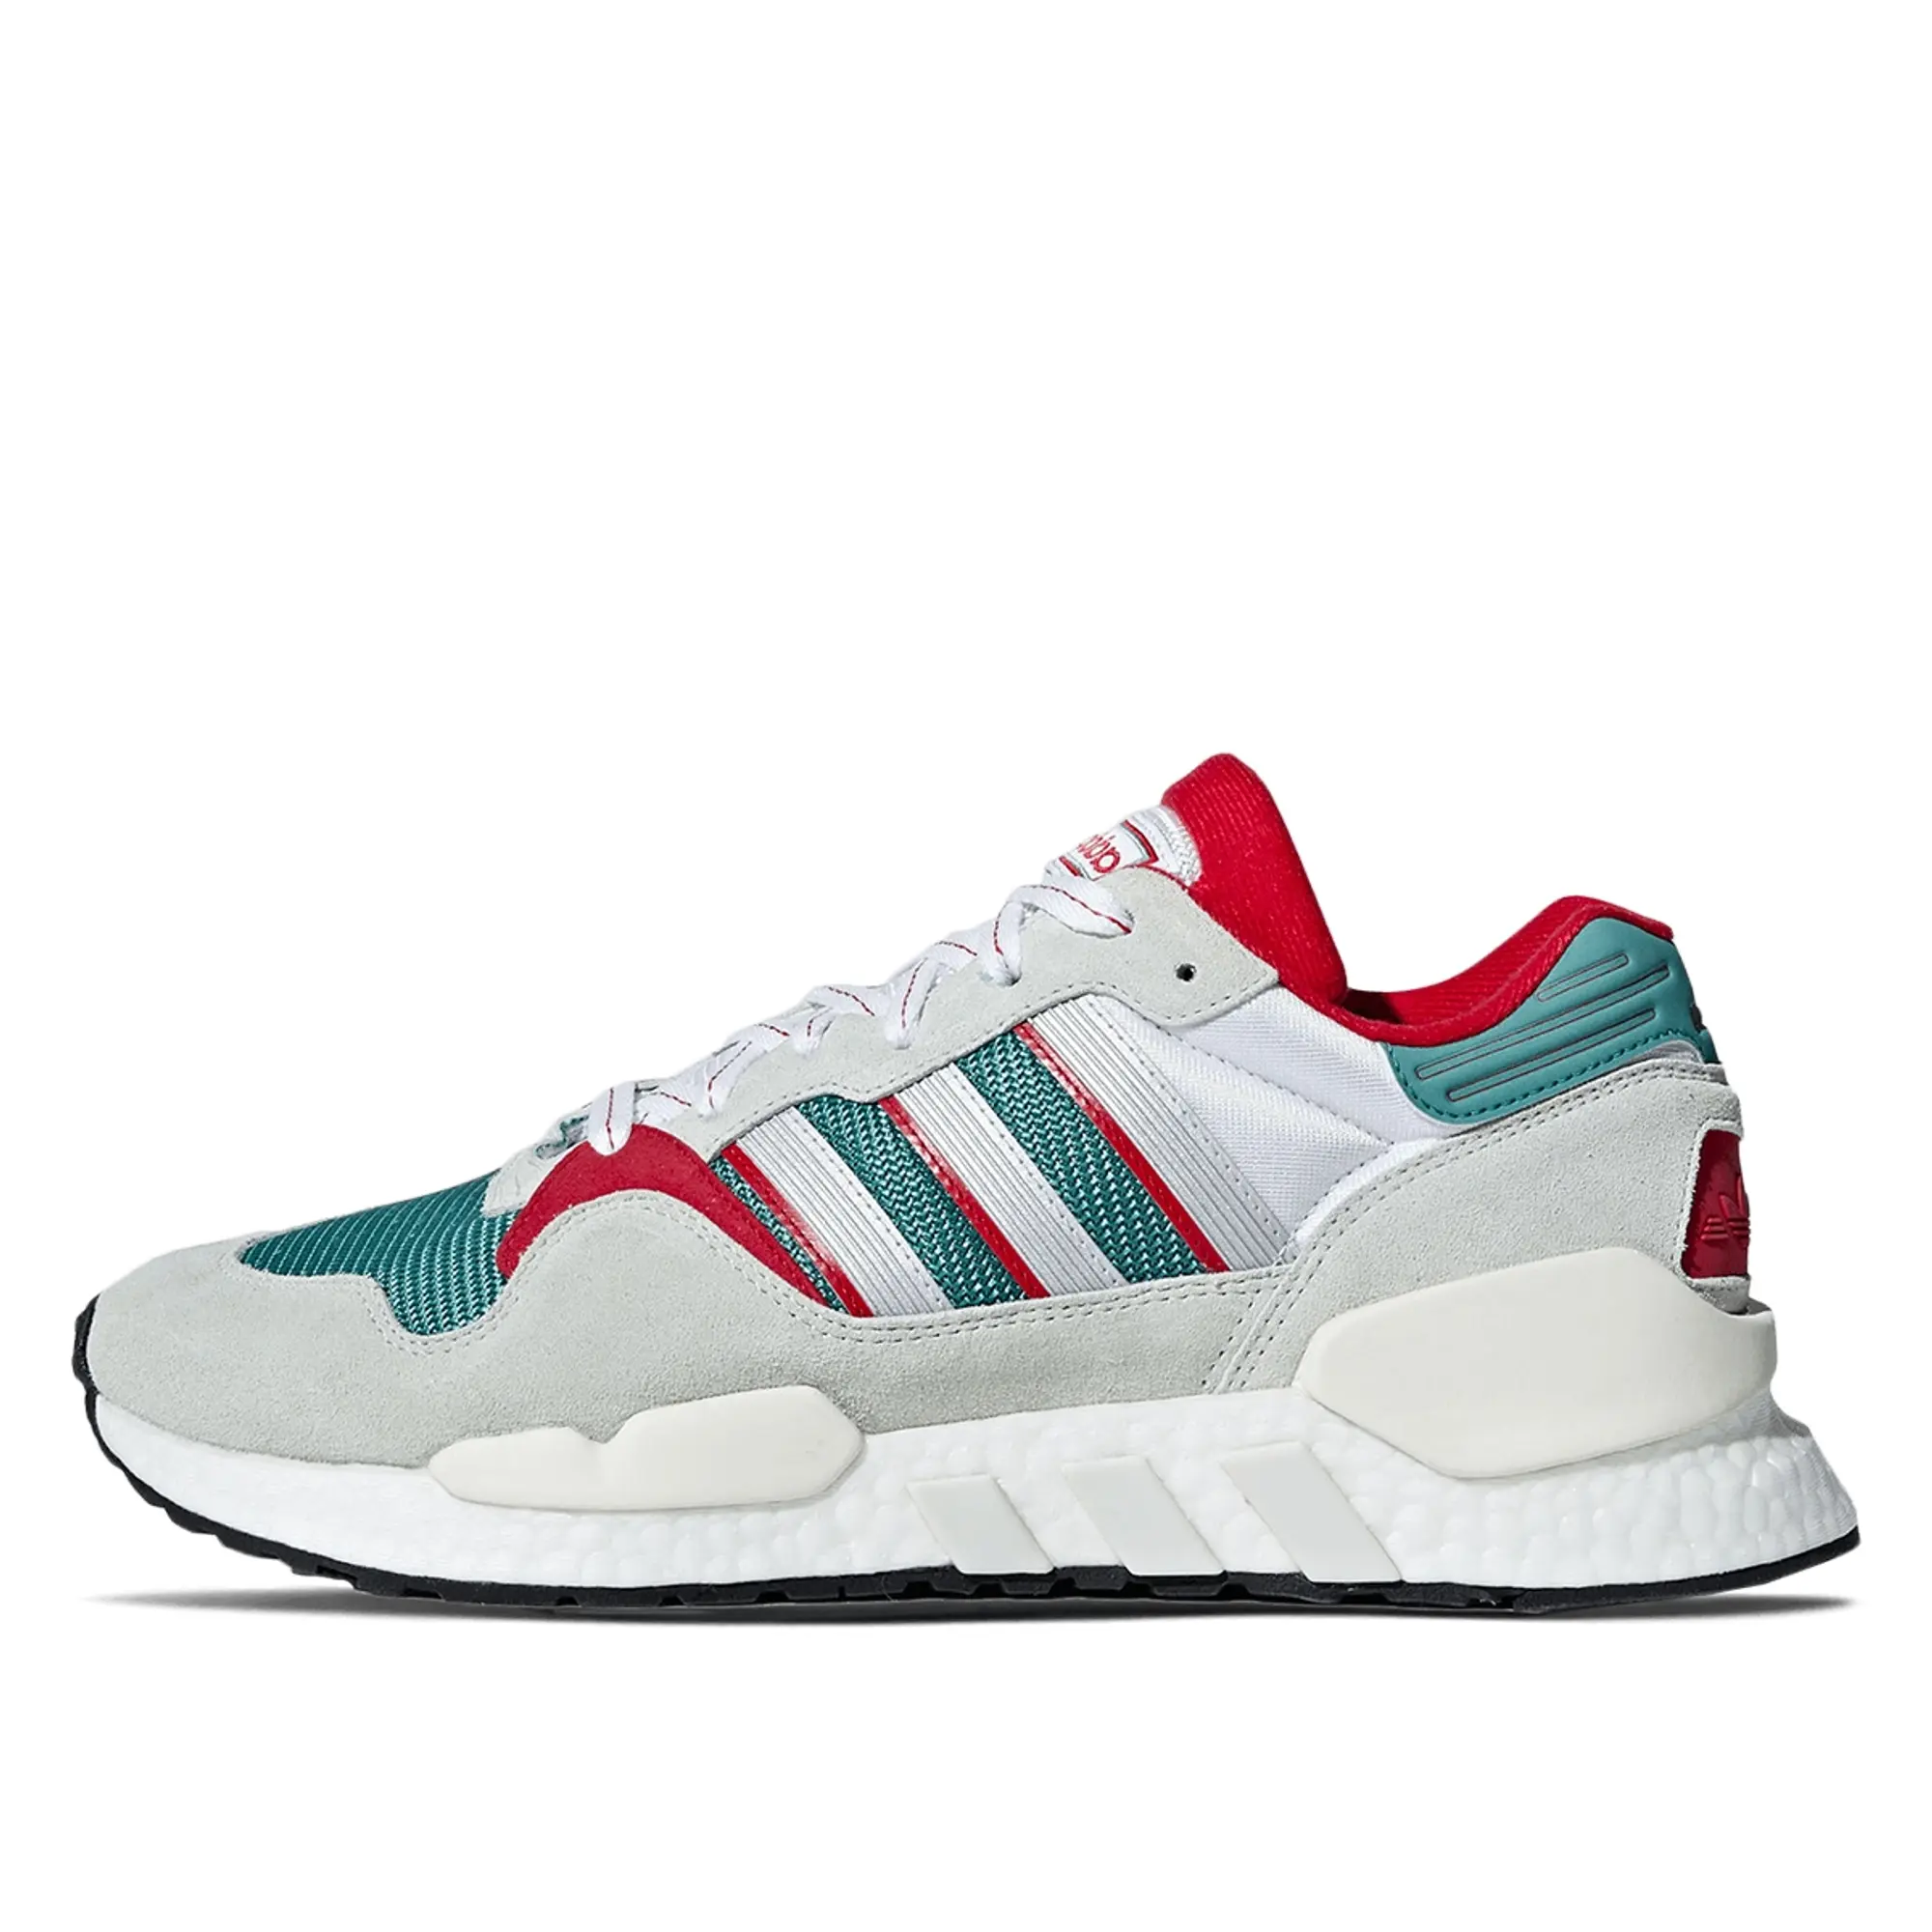 adidas ZX 930 x EQT Never Made Pack